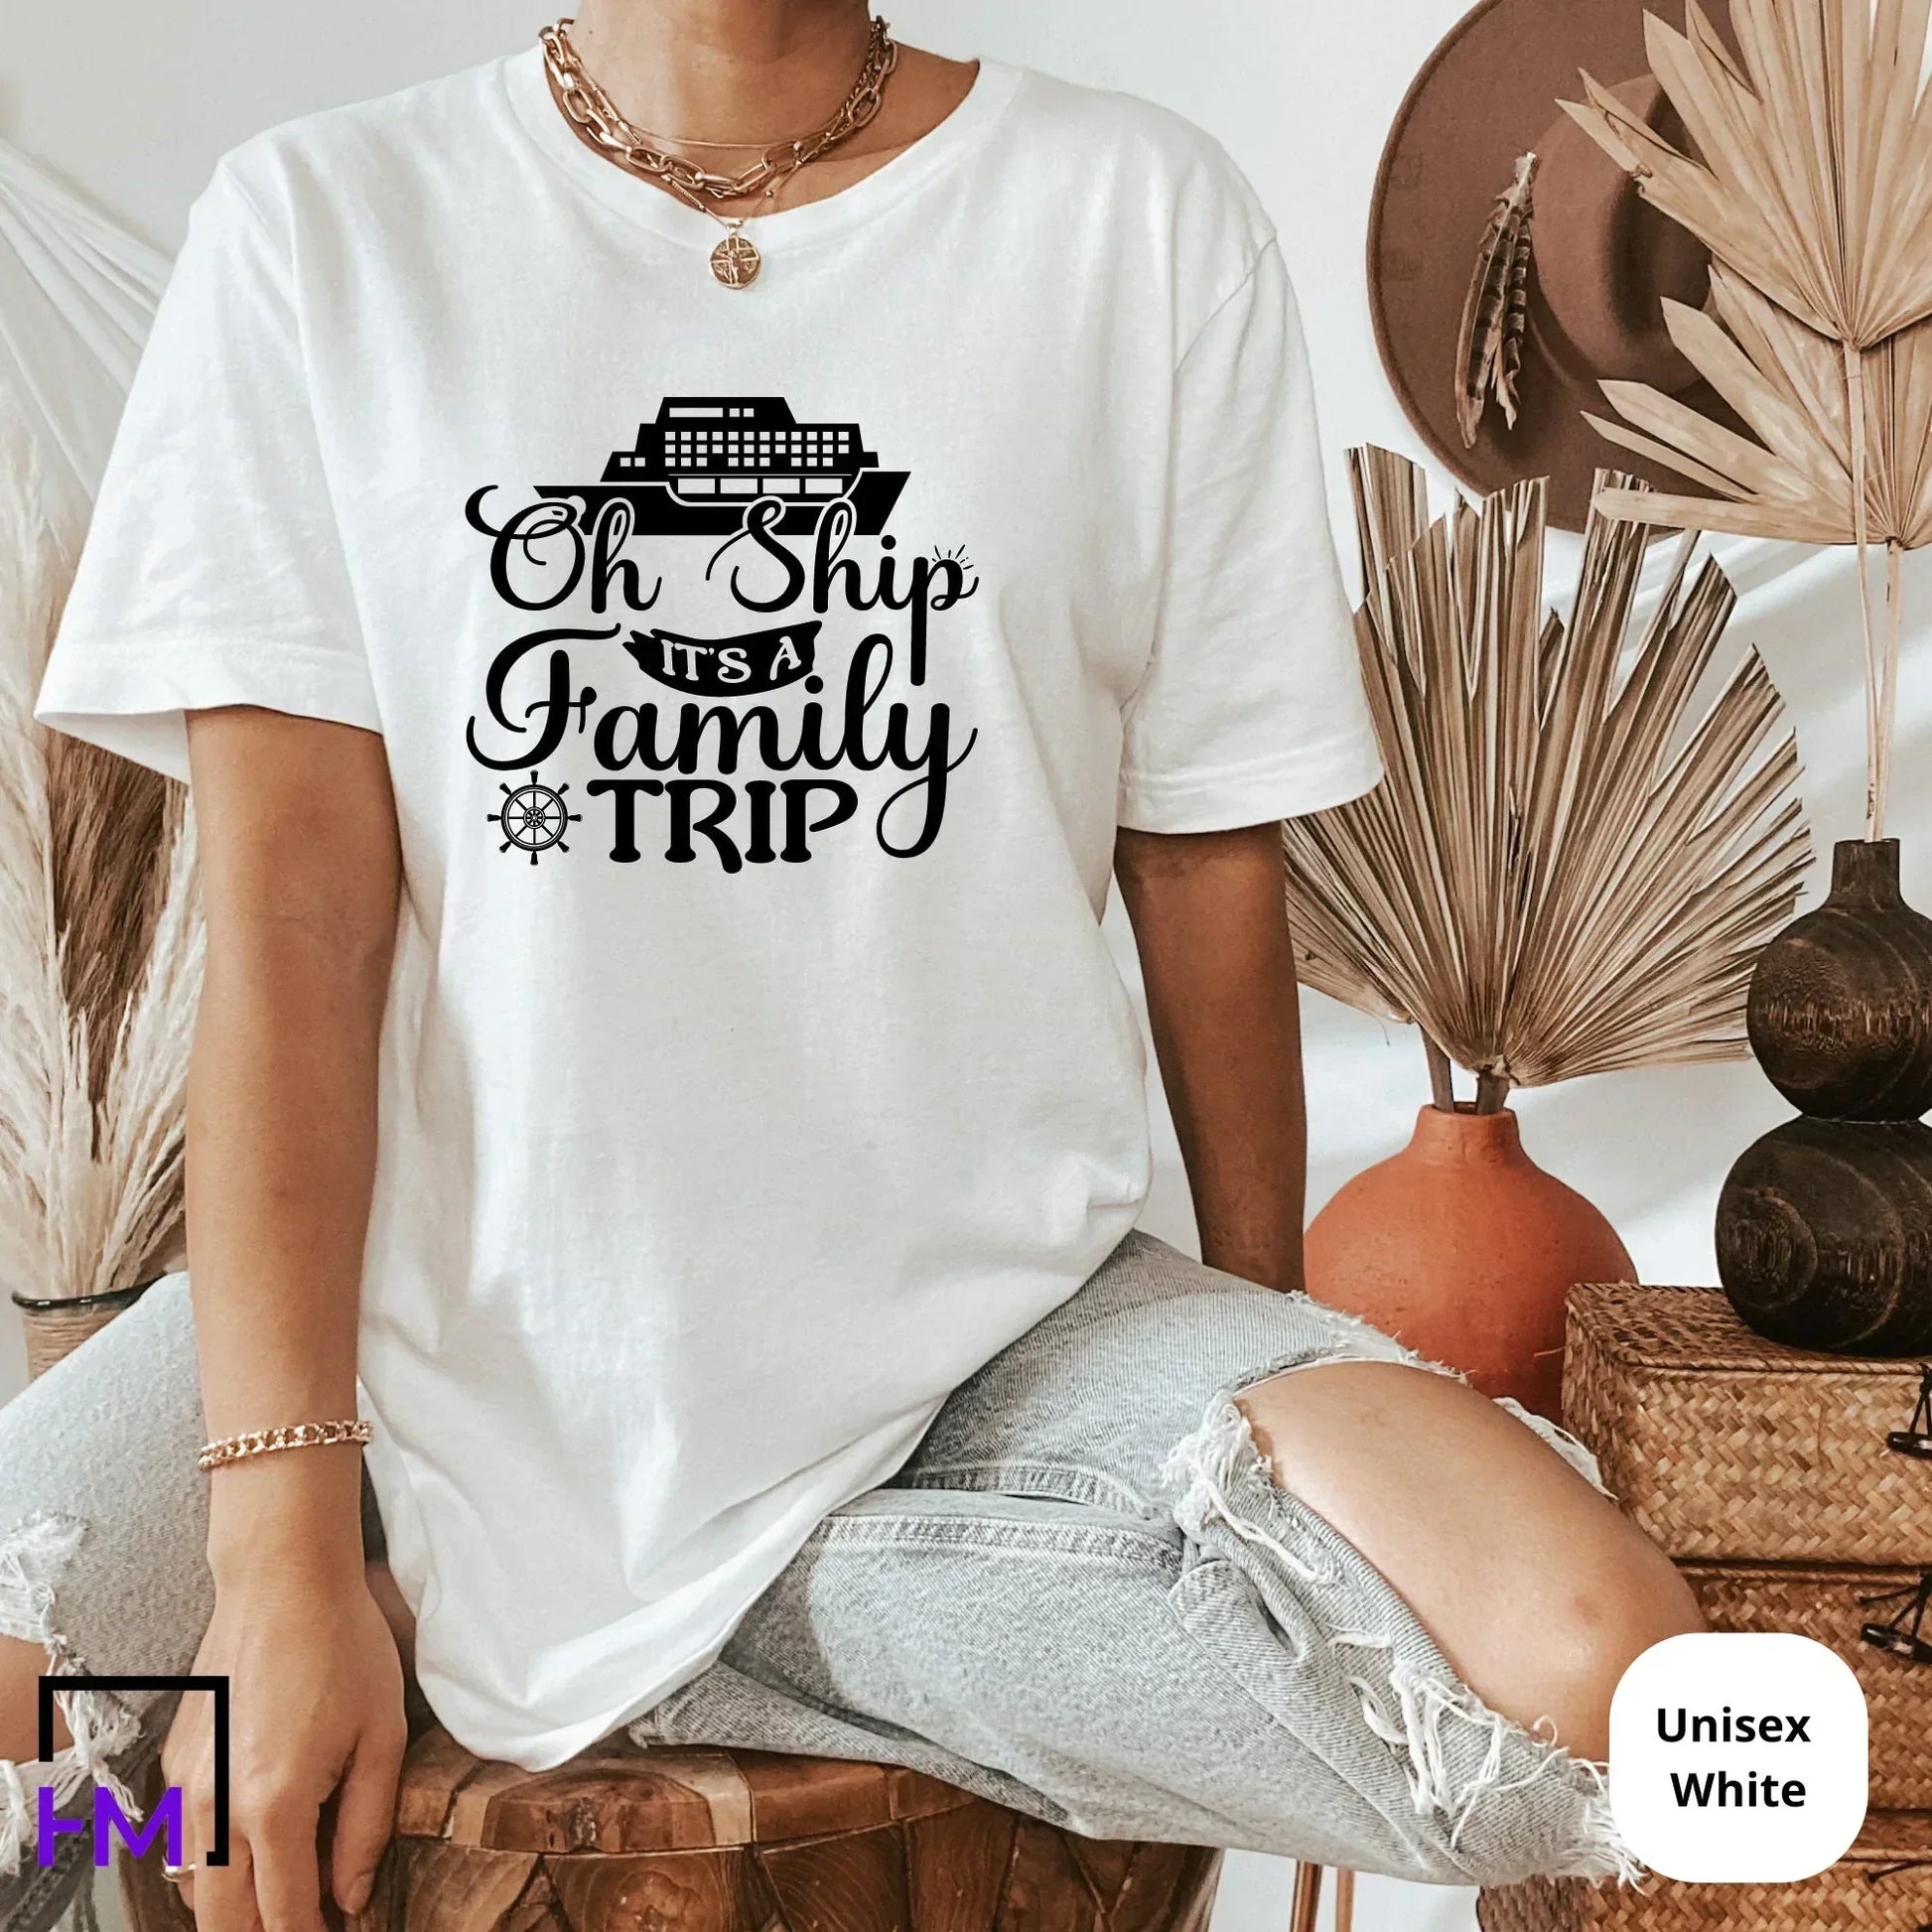 Oh Ship It's a Family Trip Cruise Shirts HMDesignStudioUS